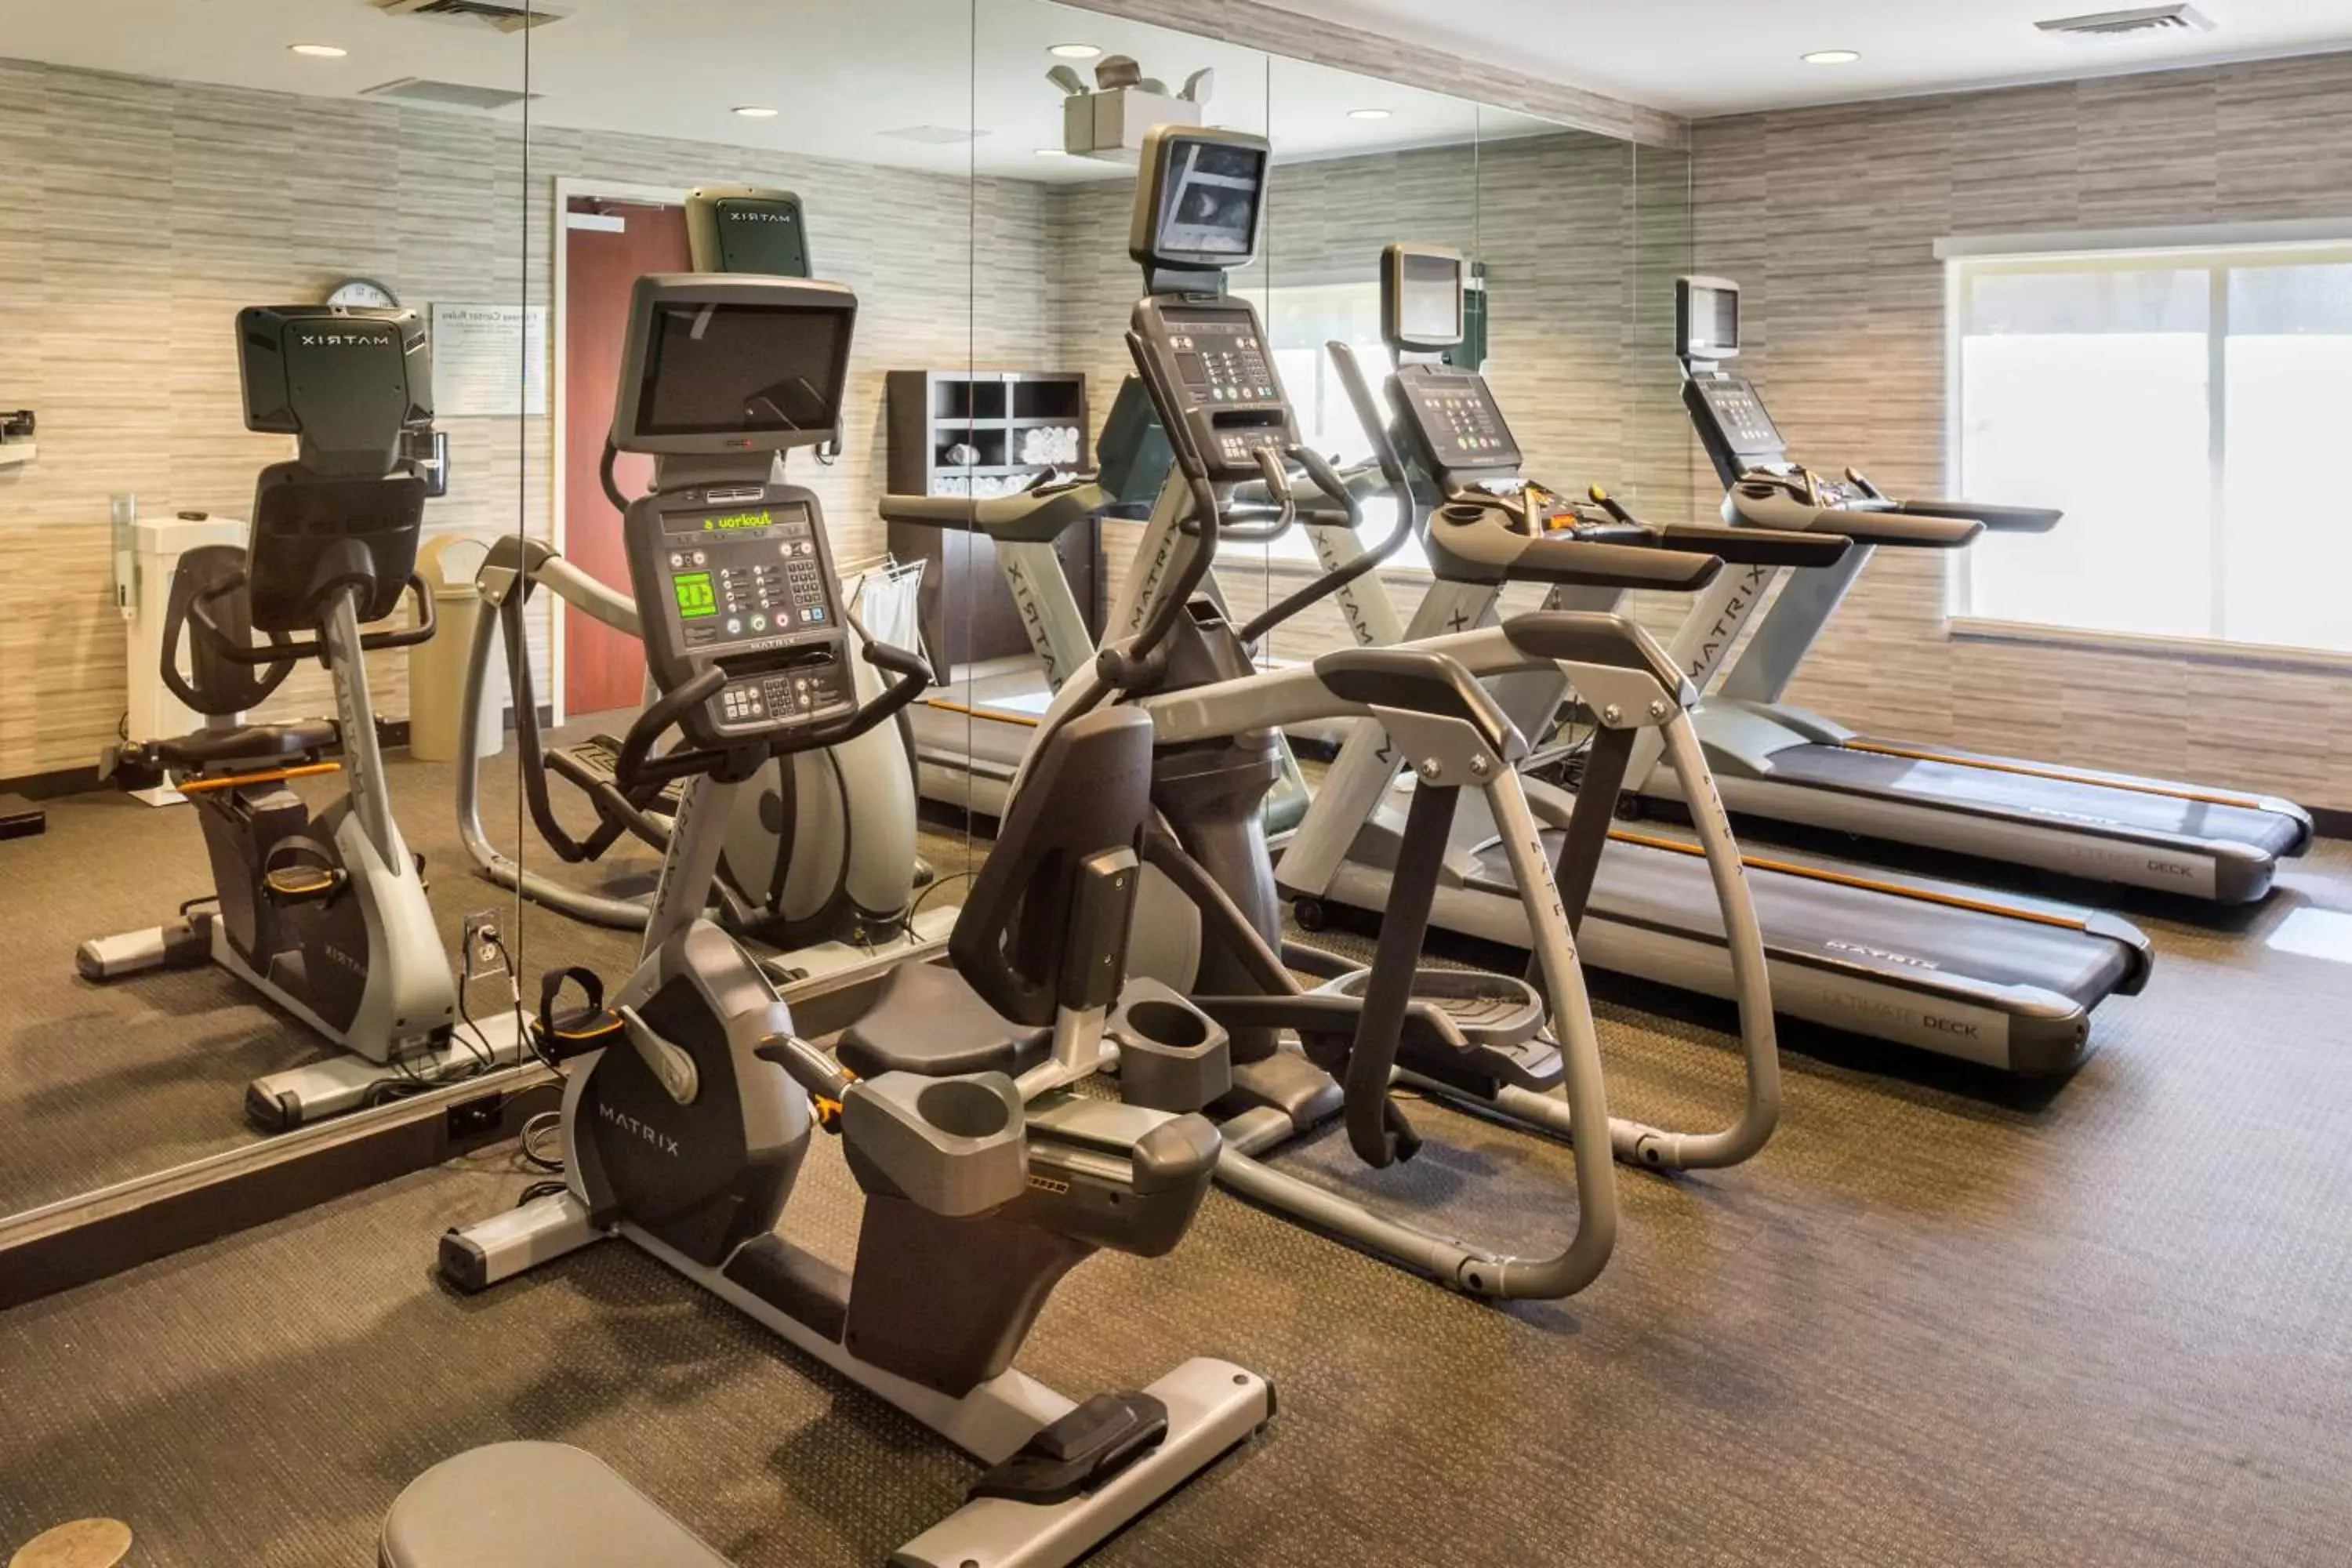 Fitness centre/facilities, Fitness Center/Facilities in Courtyard Thousand Oaks Ventura County